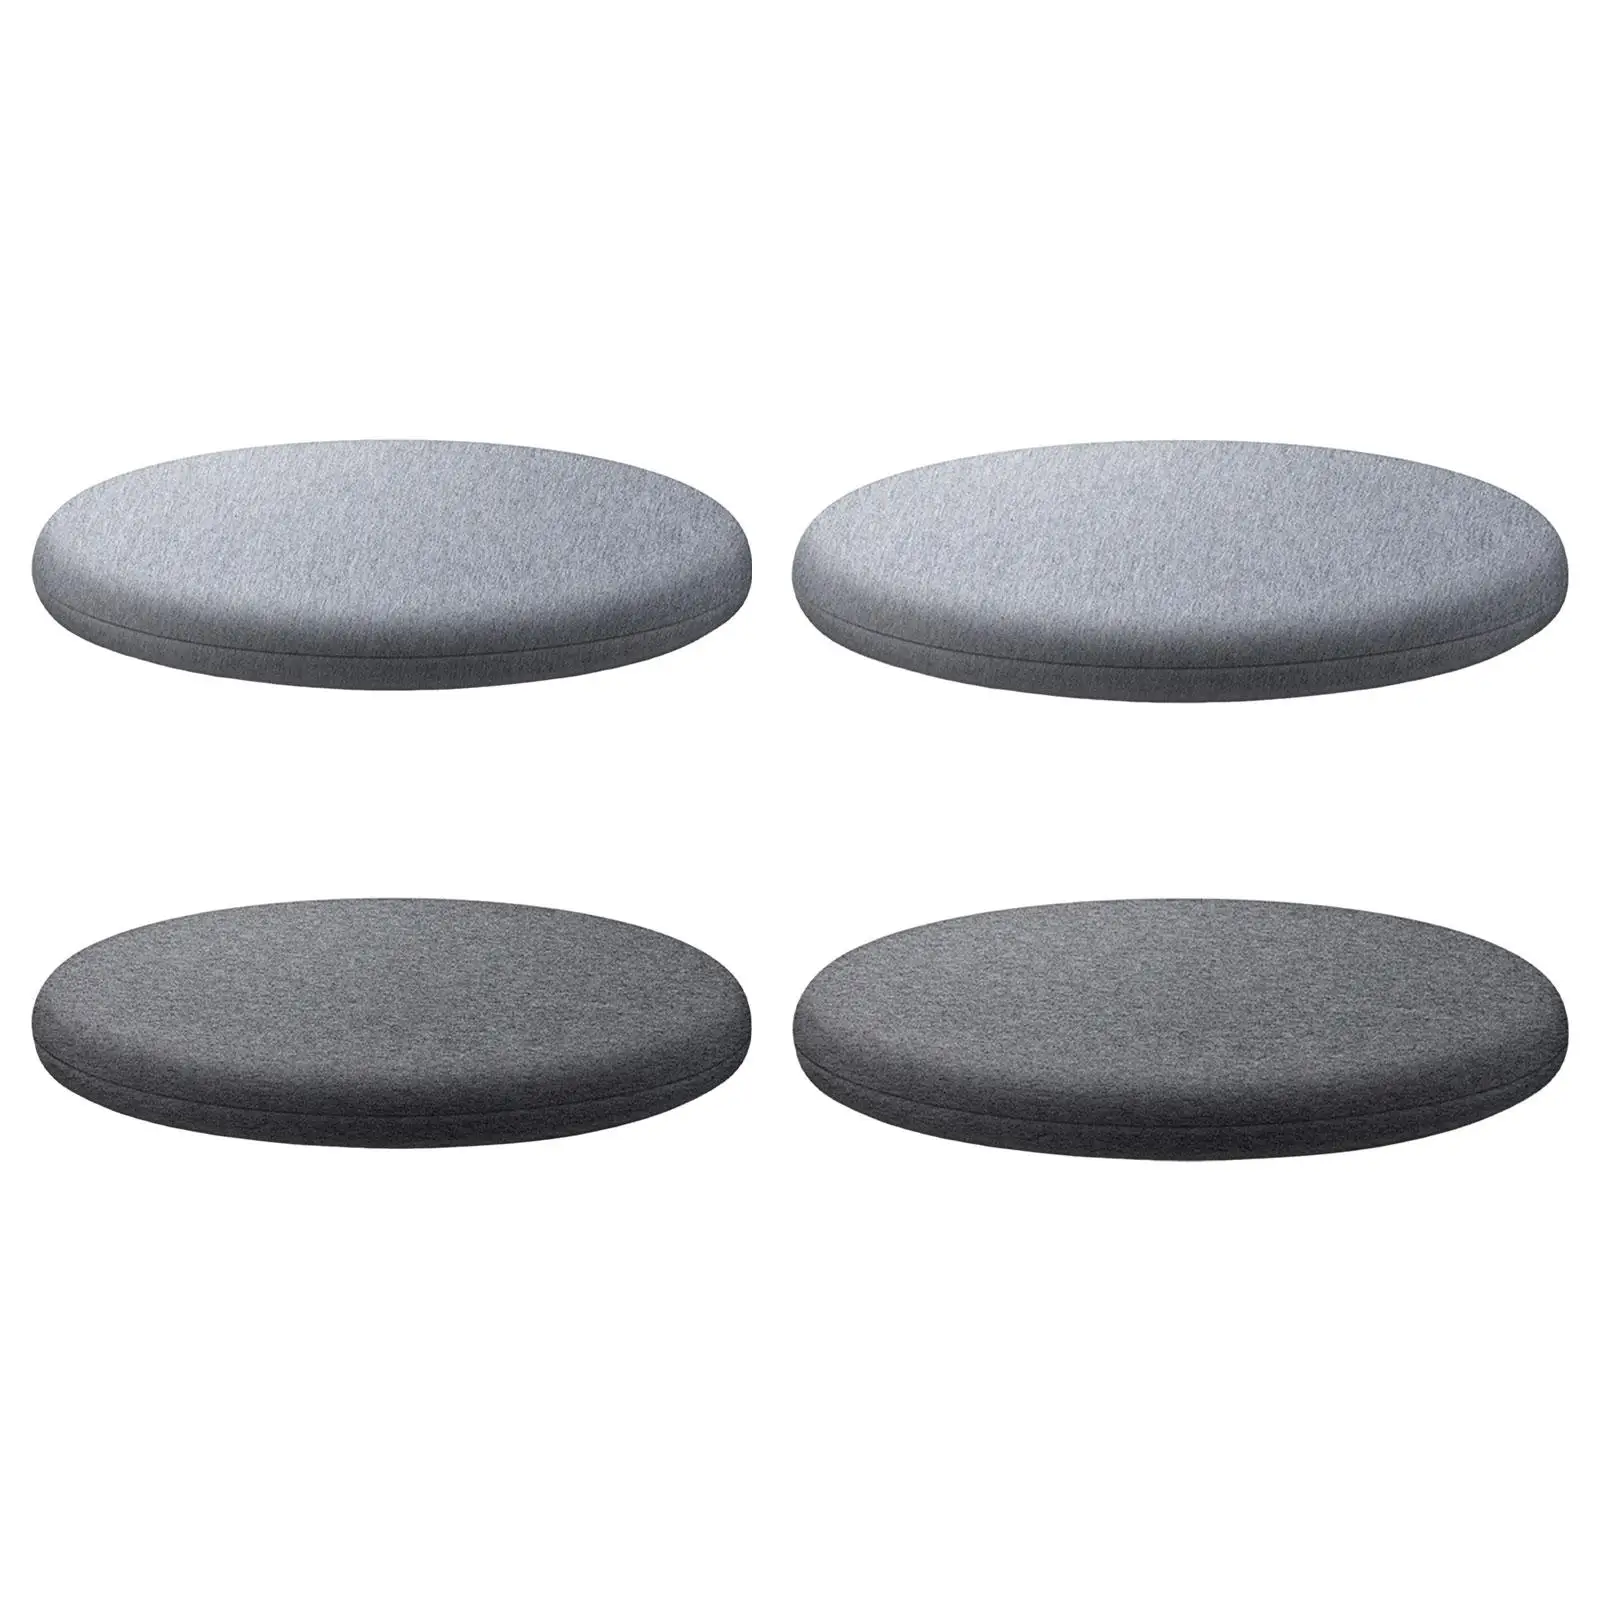 Round Seat Pad Soft Memory Foam Seat Cushion for Dining Room Office Kitchen